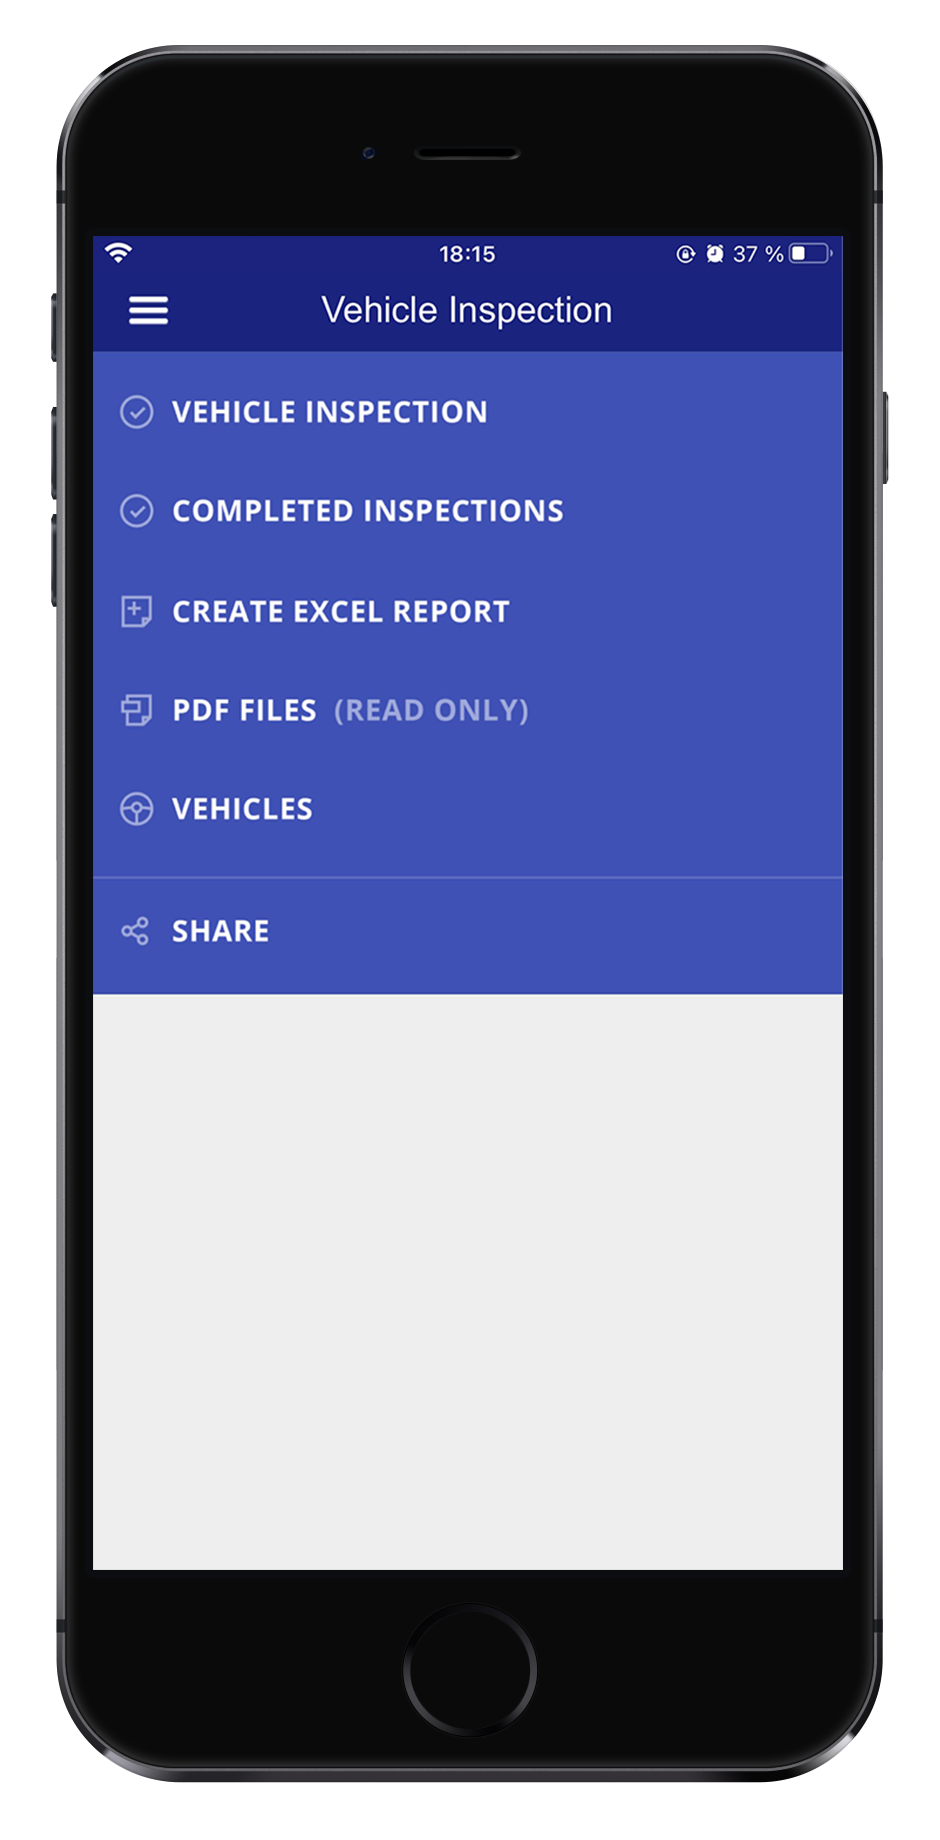 inspect-maintain-vehicles-app-for-instant-vehicle-inspections-without